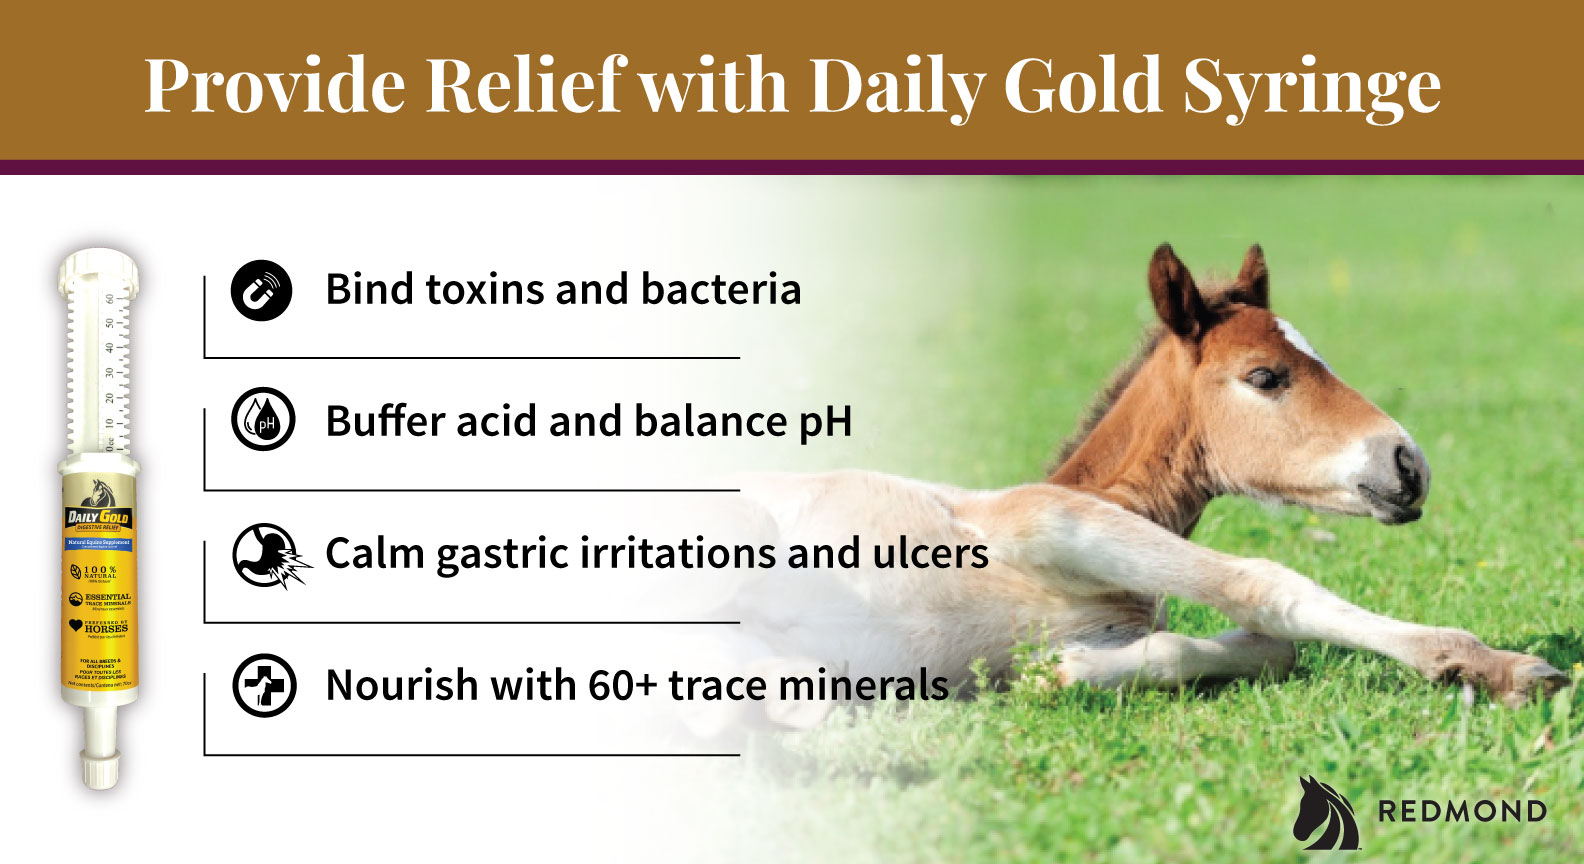 Provide relief from foal diarrhea with Daily Gold Syringe.